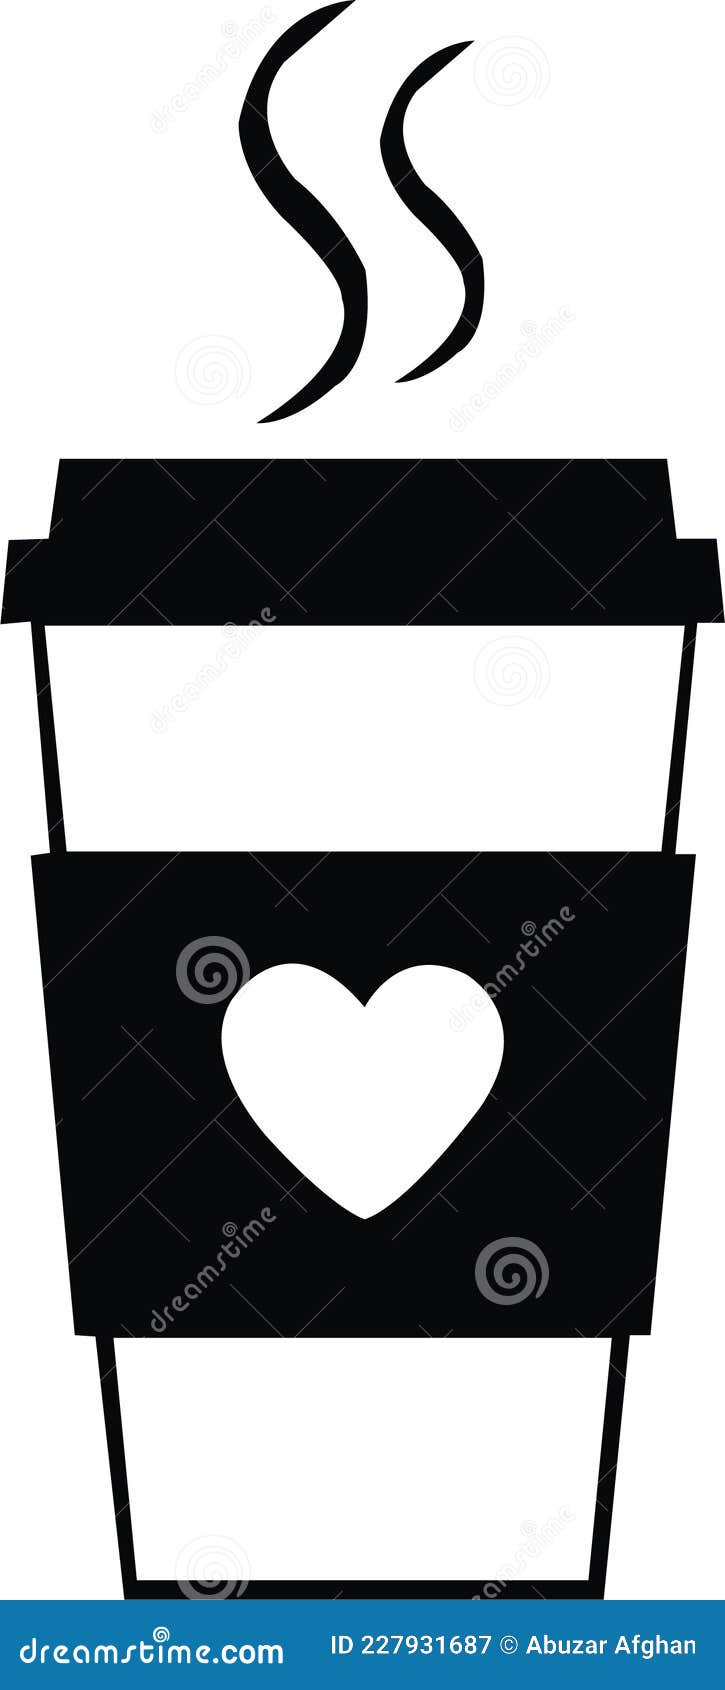 Coffee Cup Royalty Free Stock SVG Vector and Clip Art